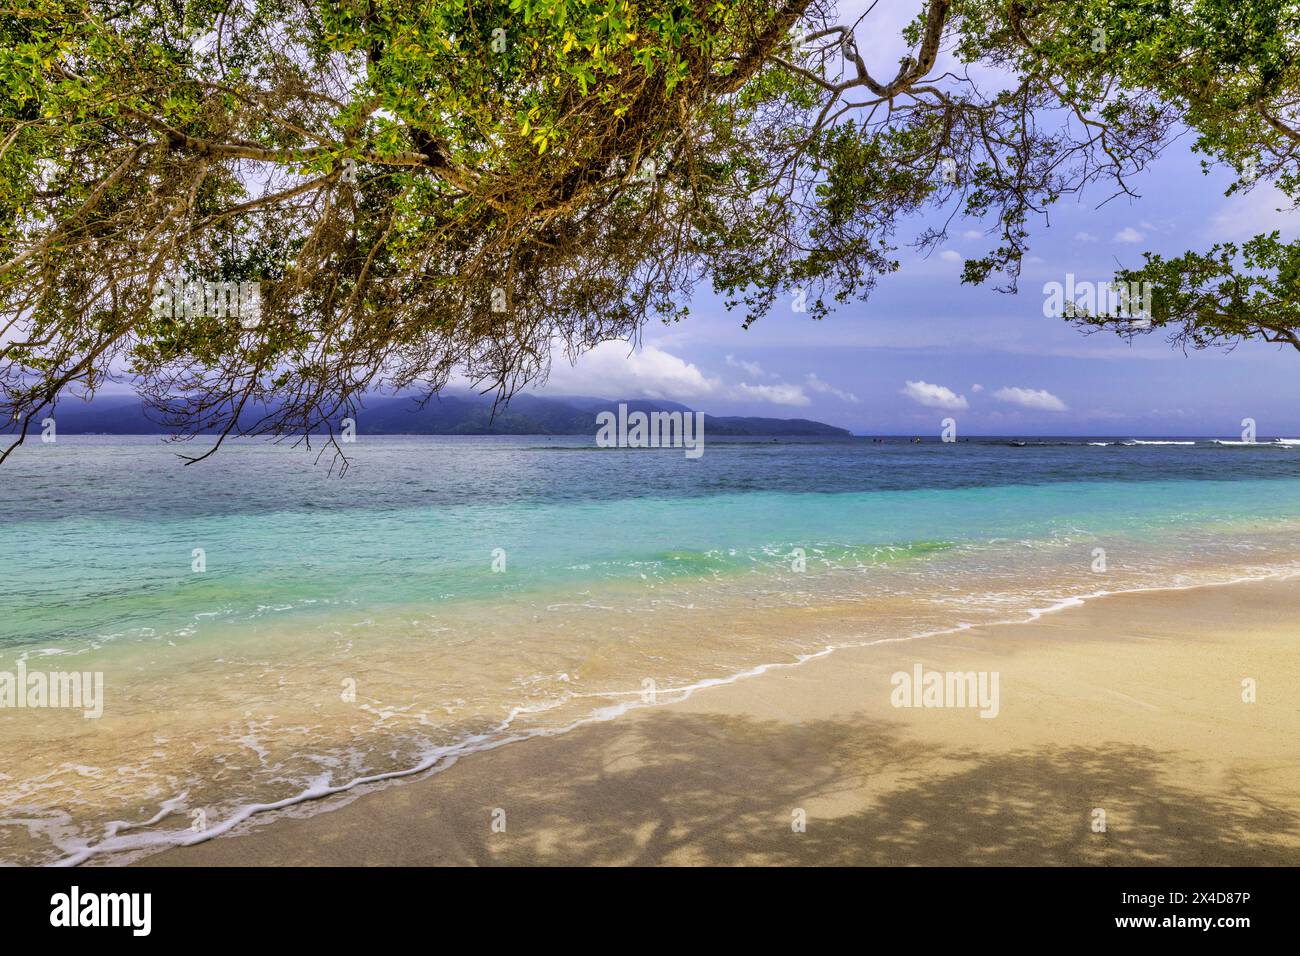 Gili Trawangan Island off the coast of Lombok, Indonesia. White sand, clear warm water with a laid back tropical atmosphere. Stock Photo